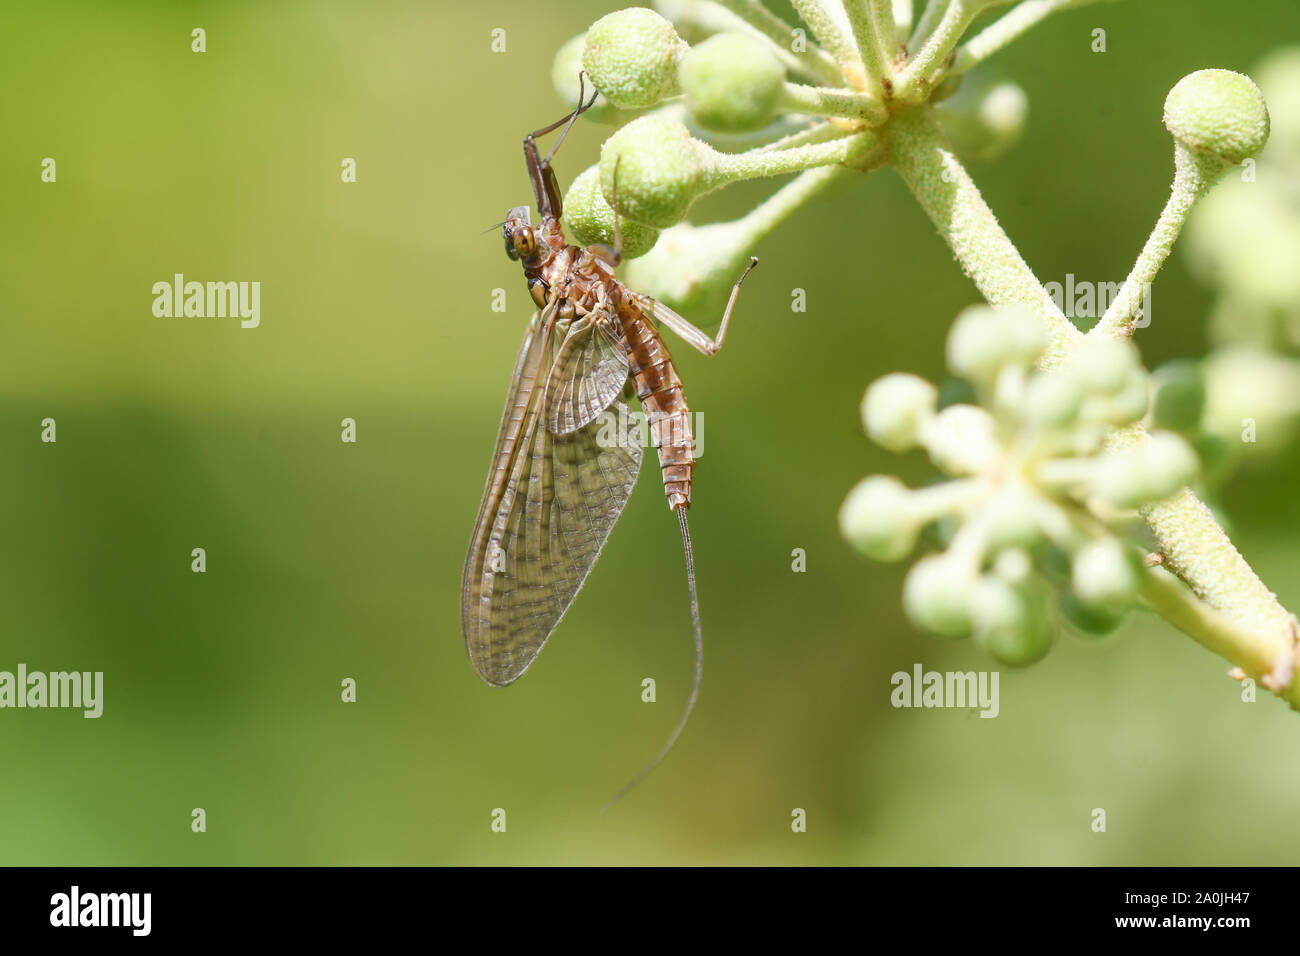 Close-up of an ephemeral perched on the flowers of an ivy Stock Photo